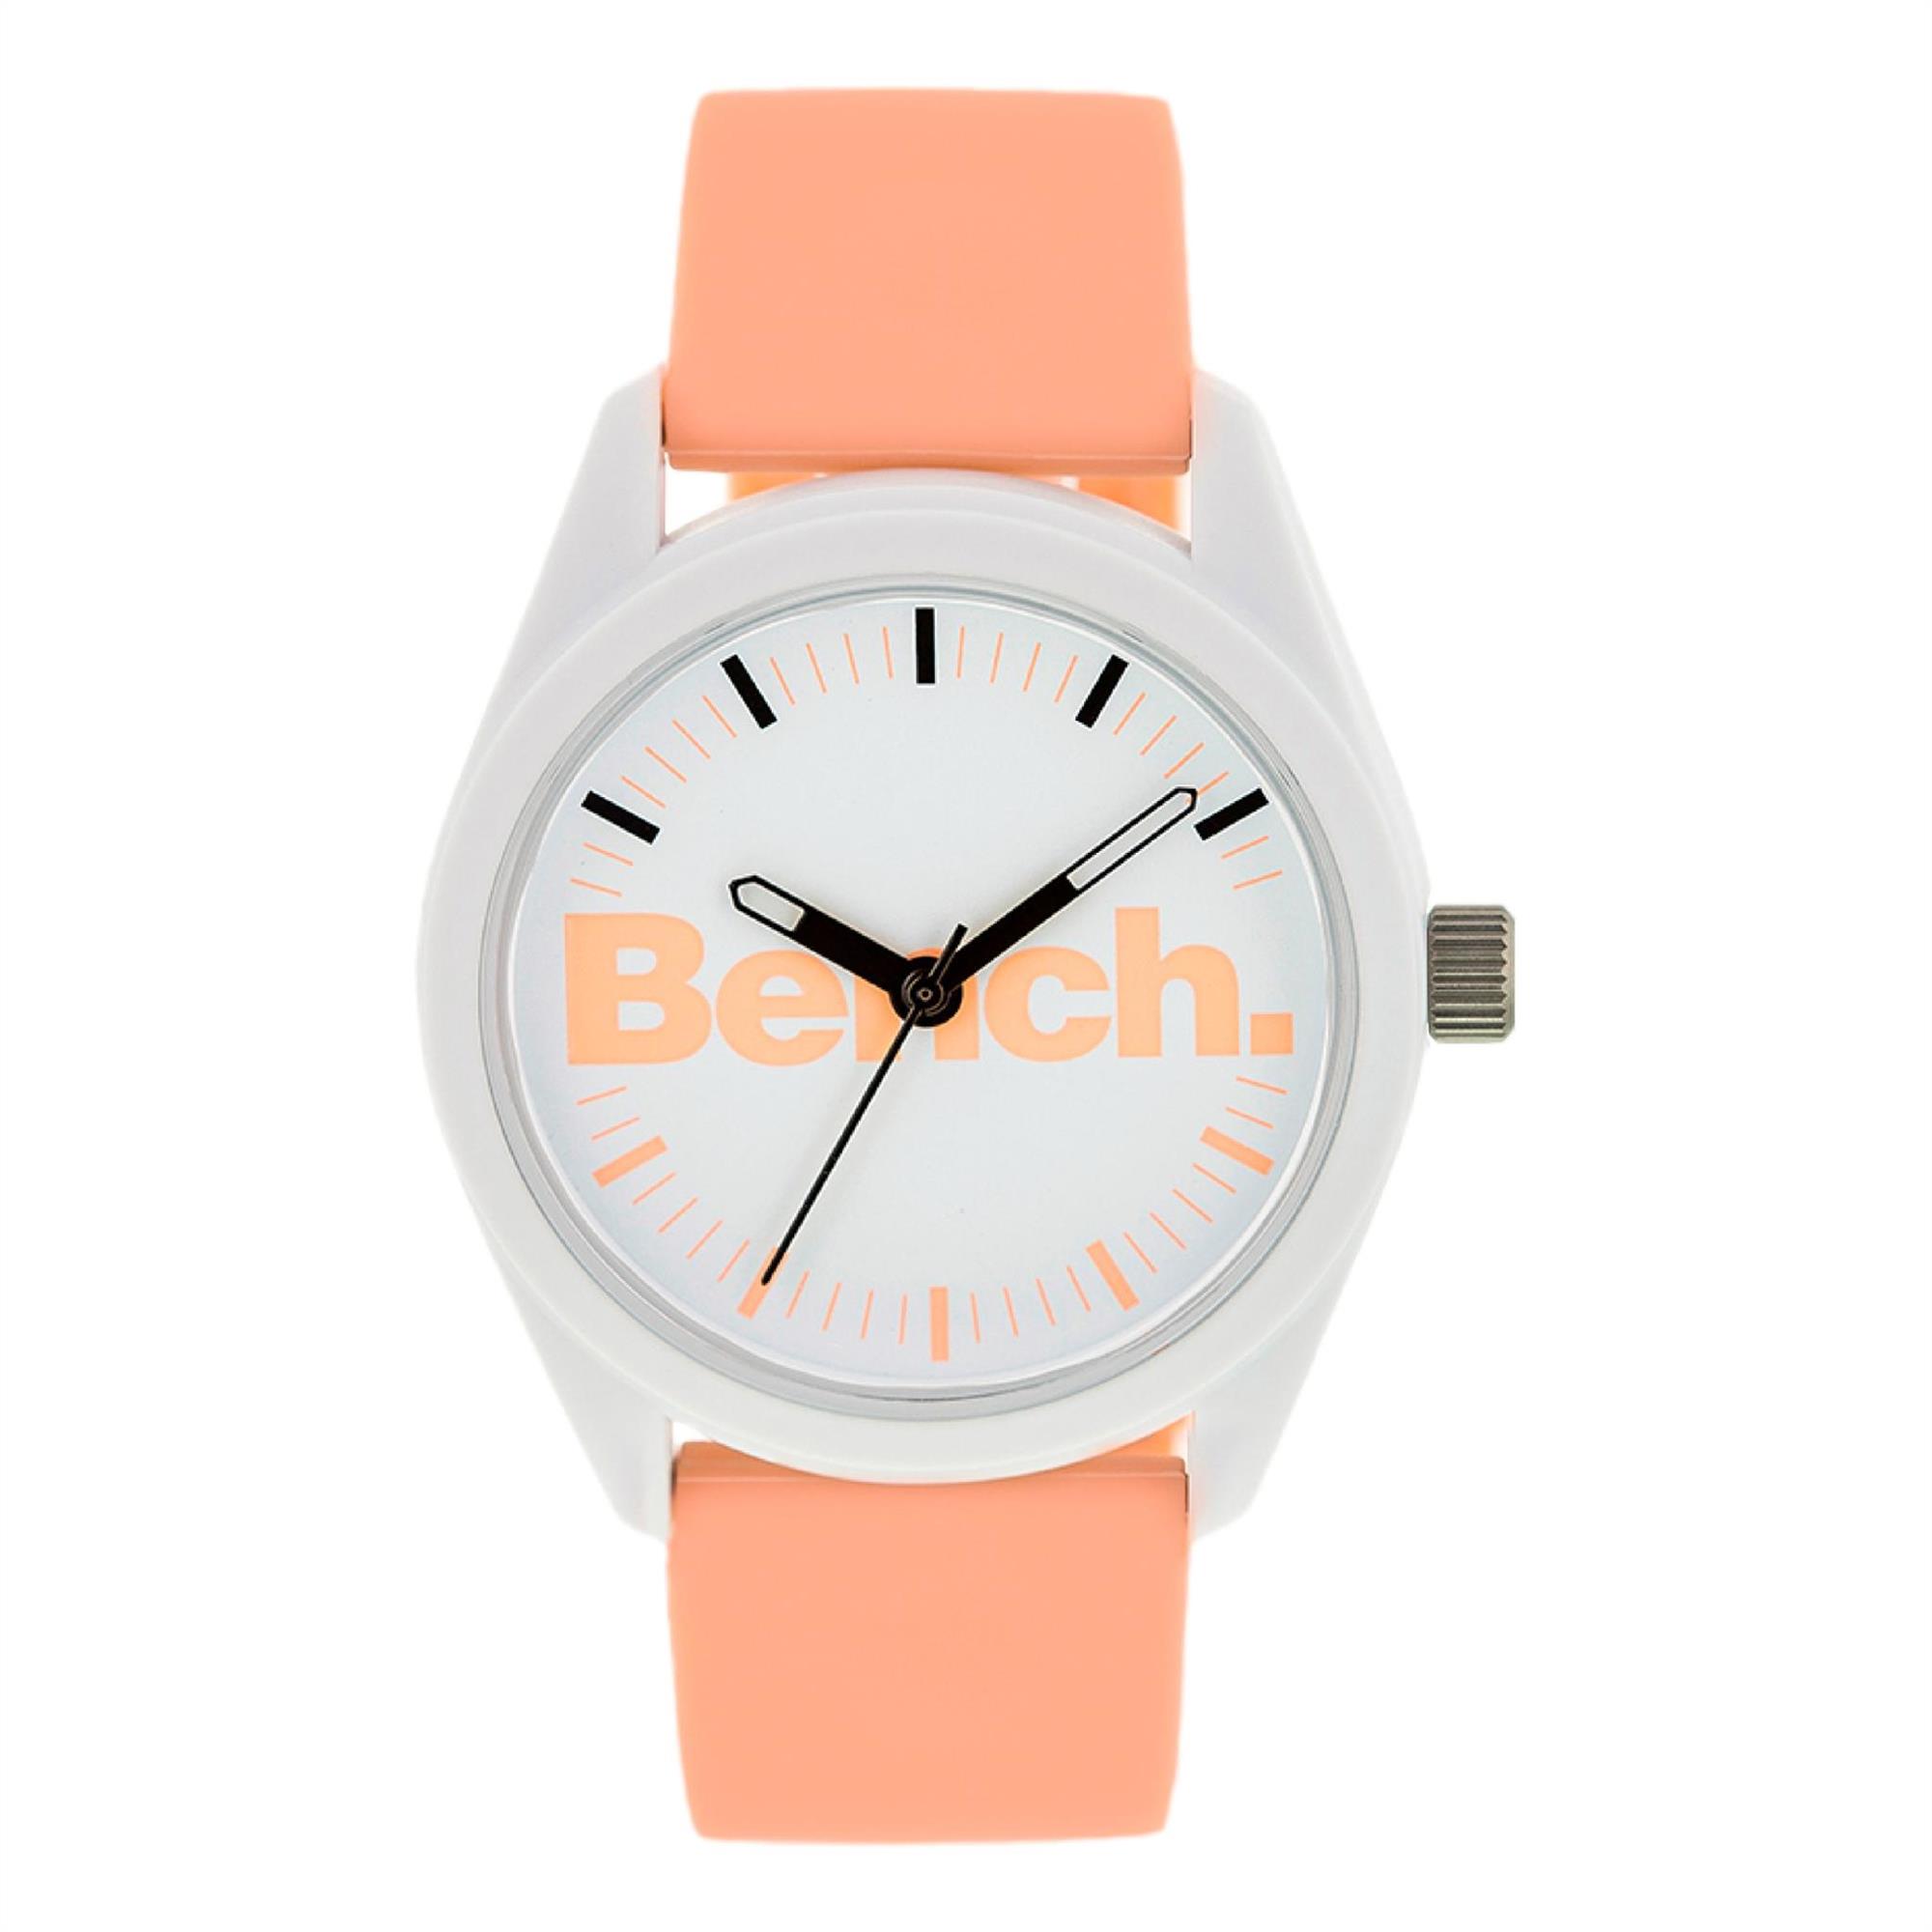 Bench Silicone Bra, Women's Fashion, Watches & Accessories, Other